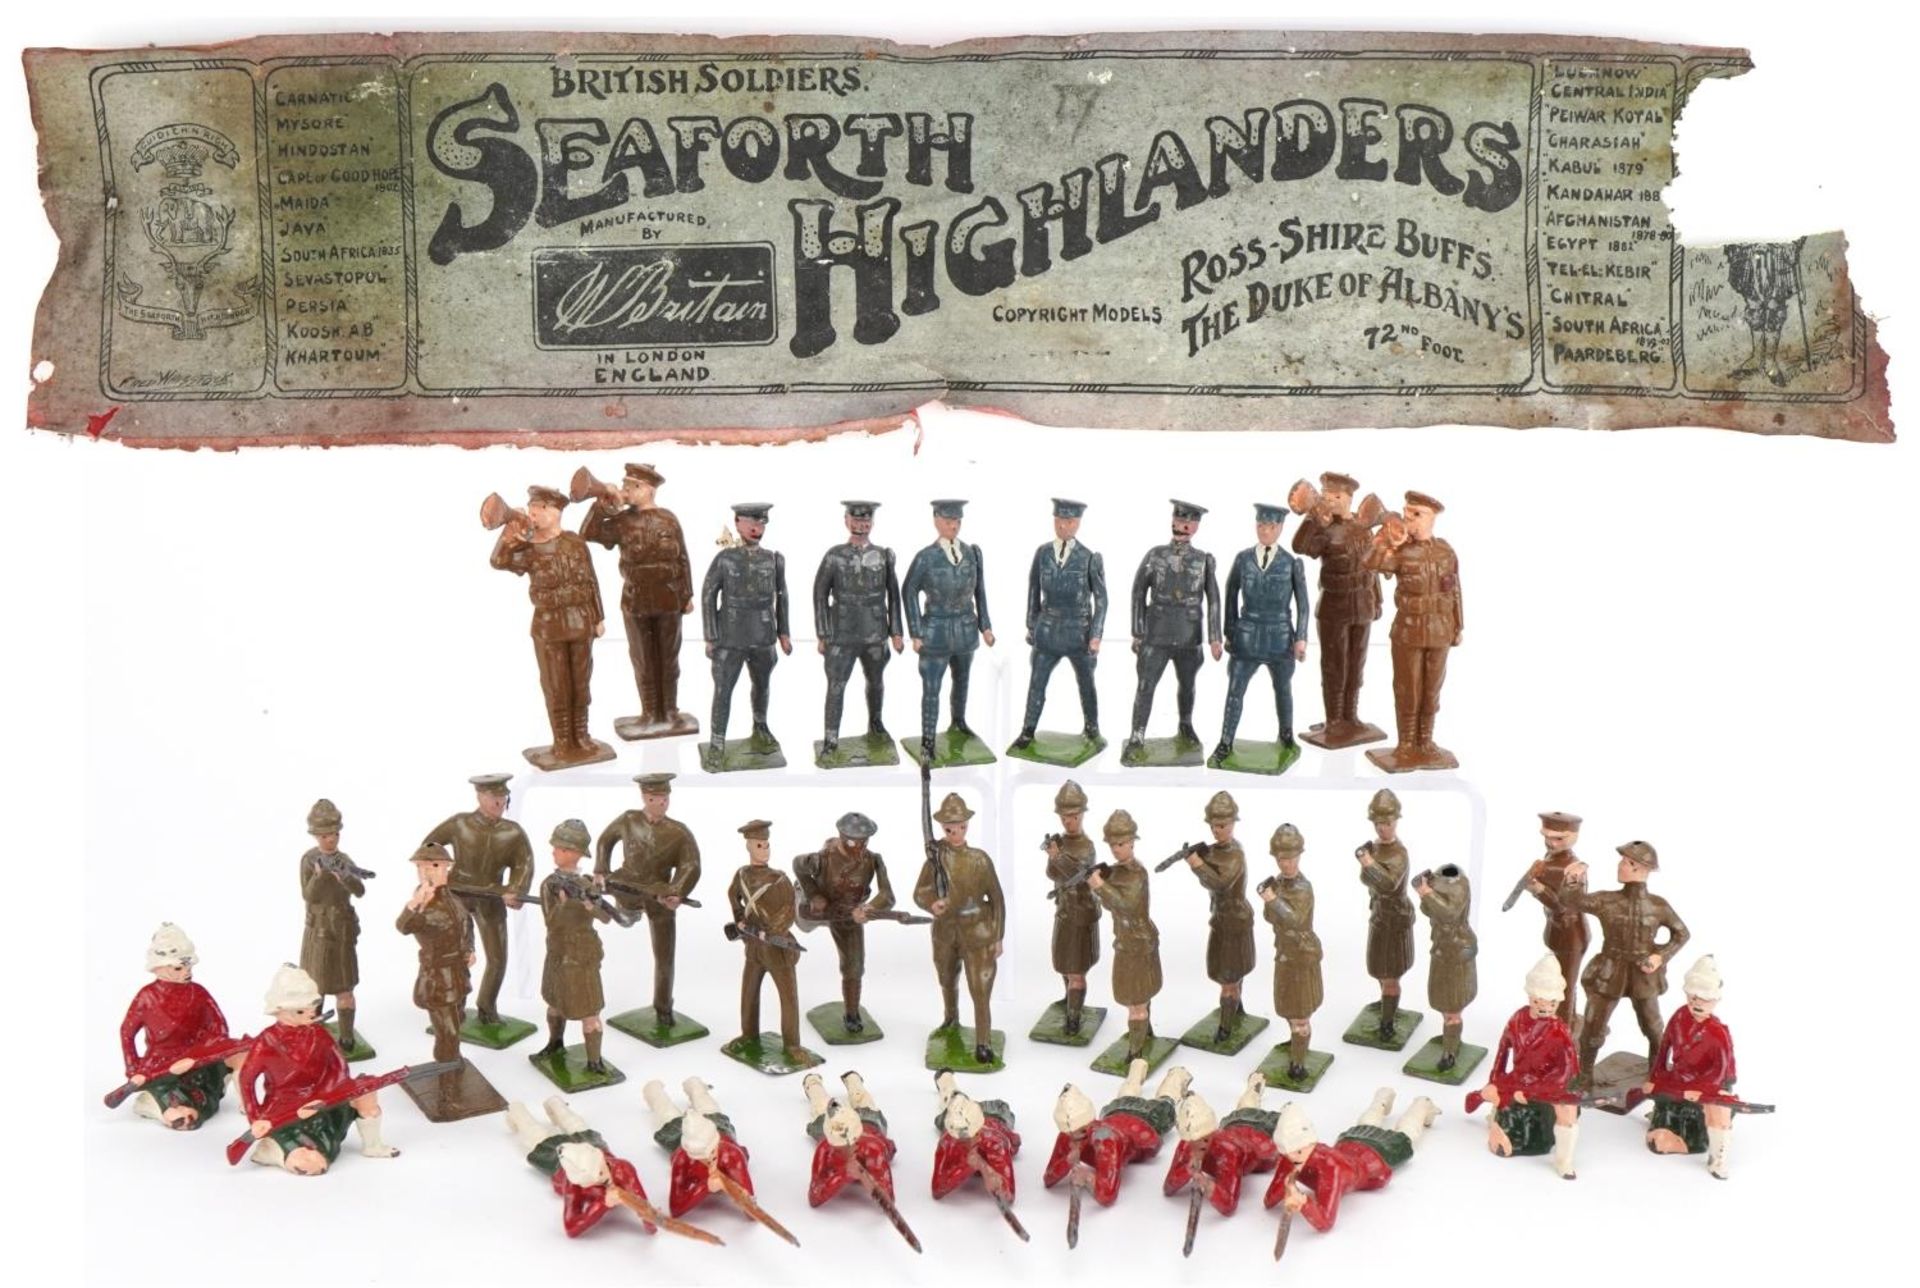 John Hill & Co and Britains hand painted lead soldiers including Seaforth Highlanders, with paper